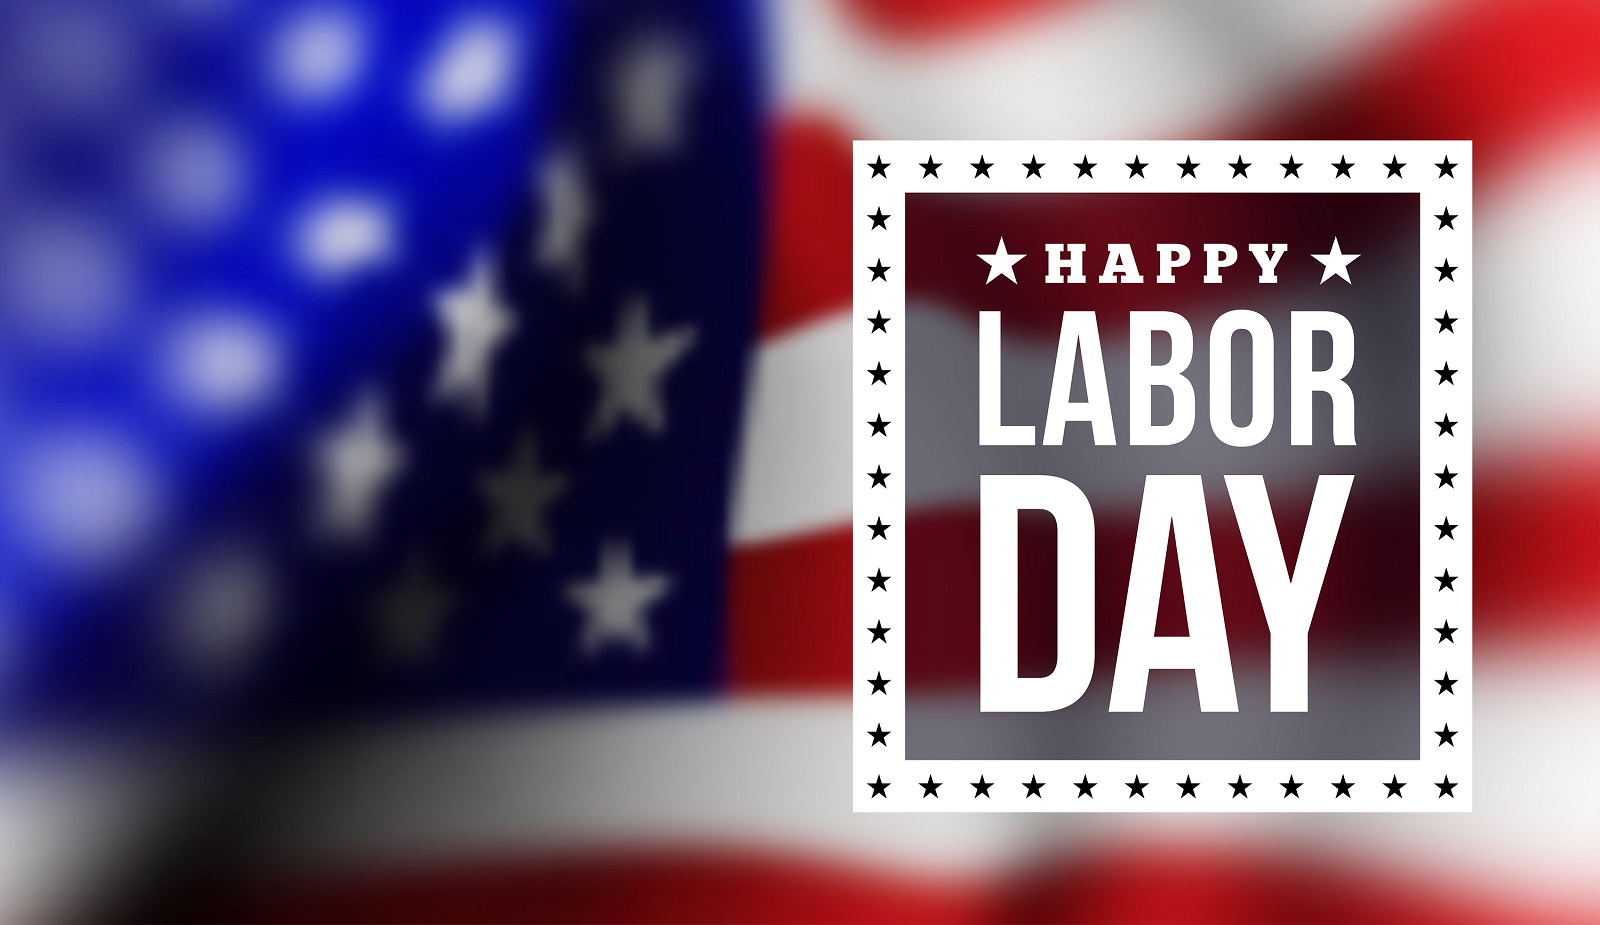 Happy Labor Day 2019 for Jean-Luc Andriot blog 090219